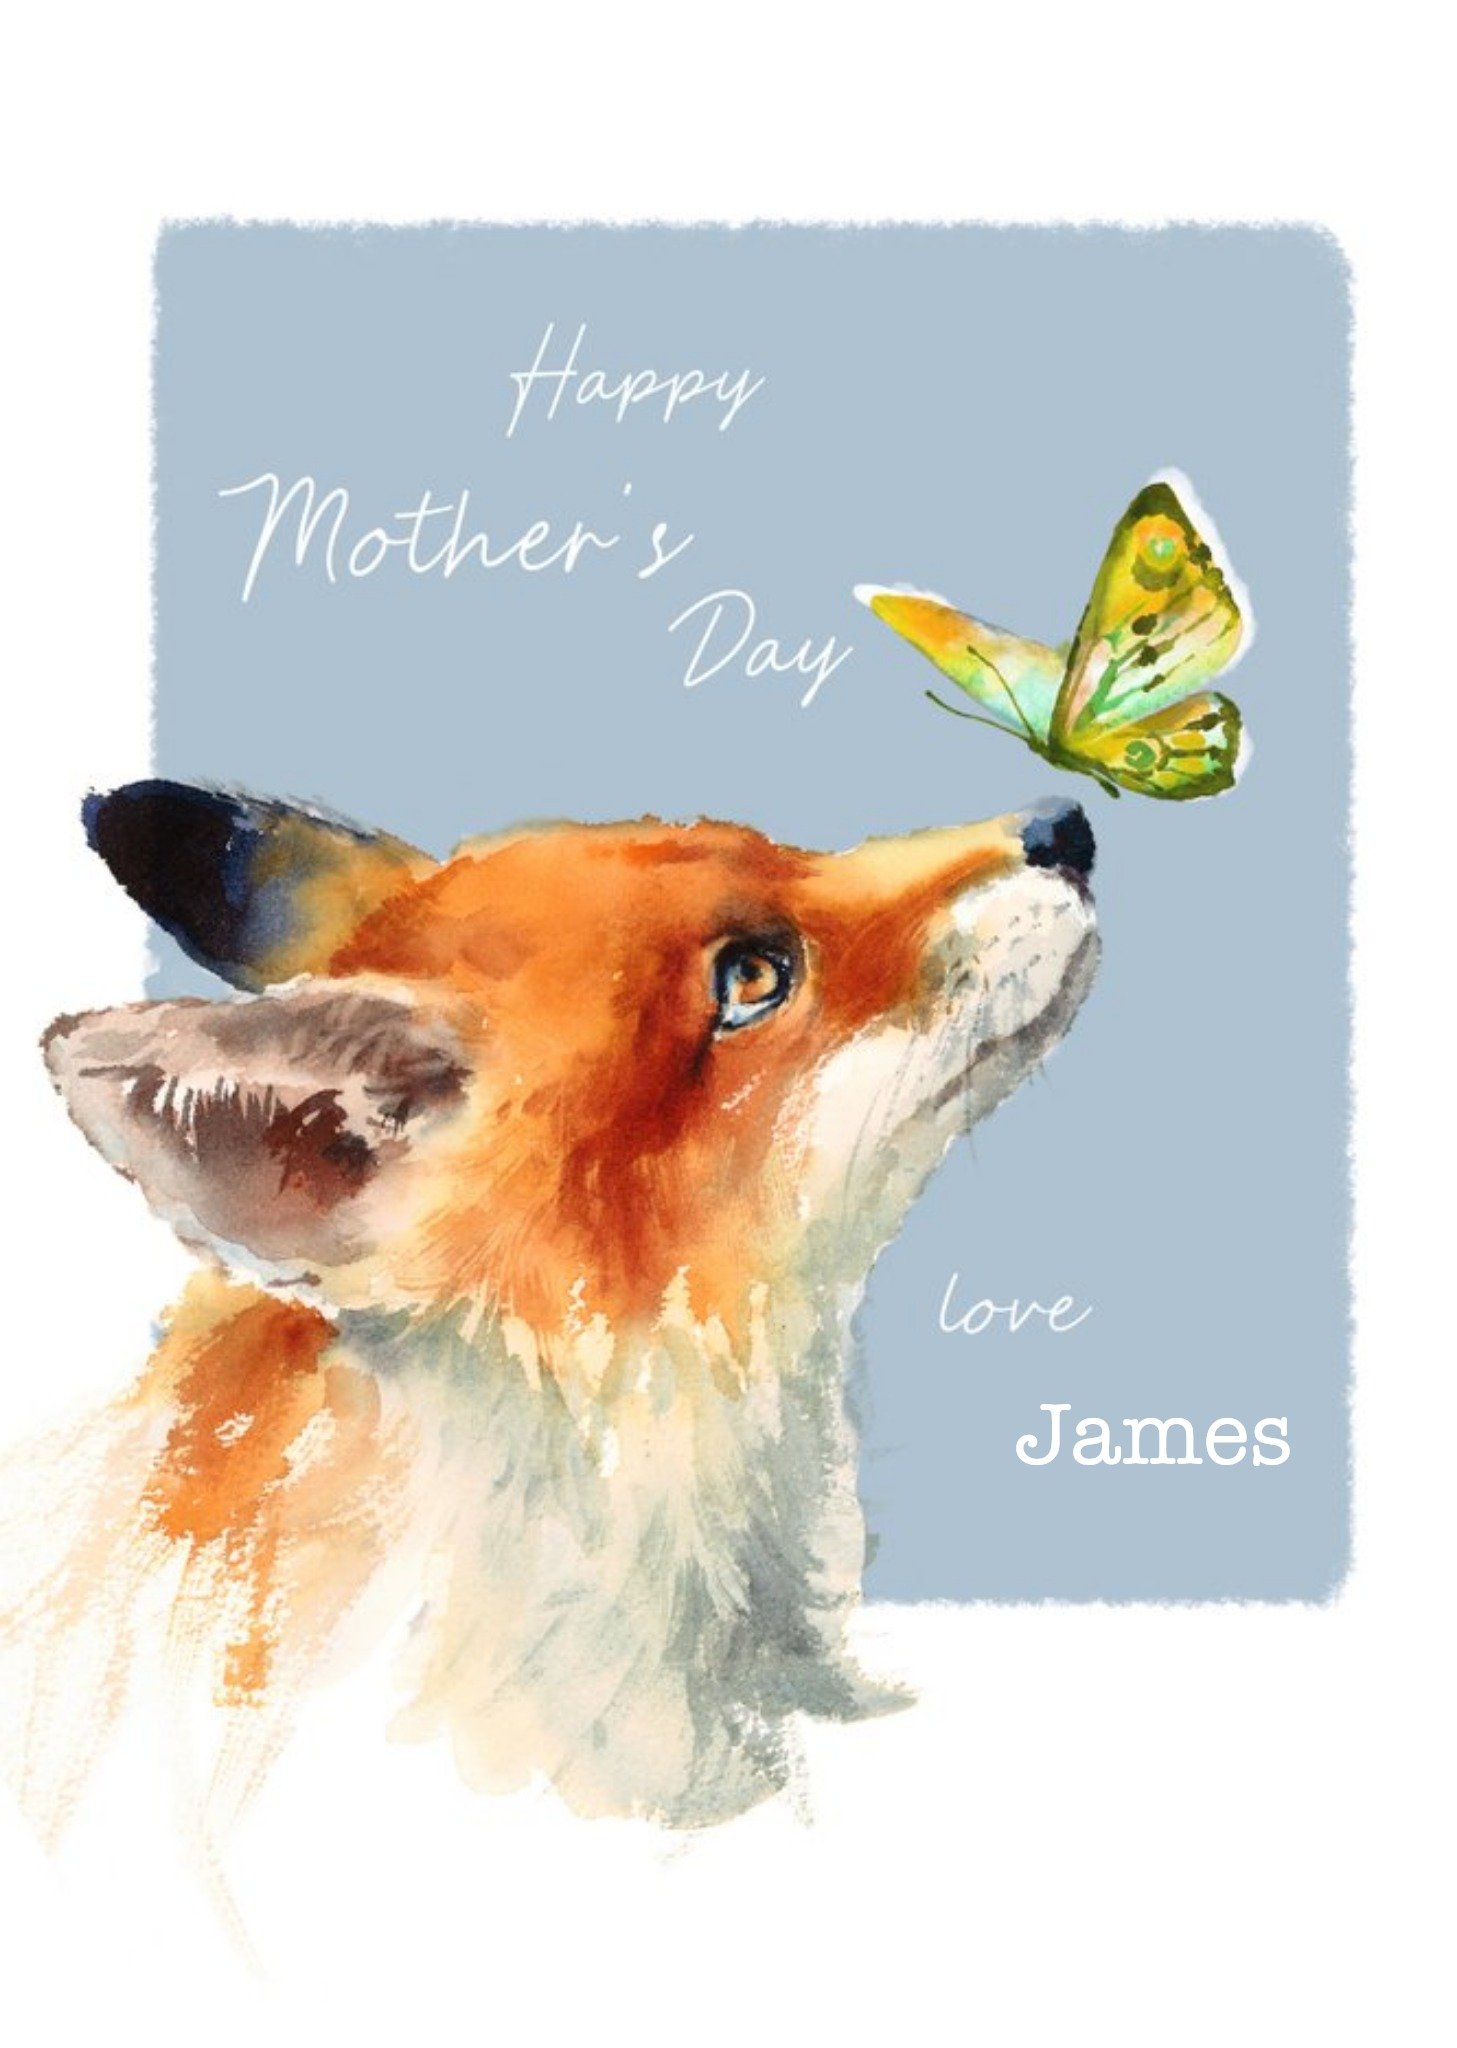 Moonpig Animal Planet Fox And Butterfly Mother's Day Card Ecard